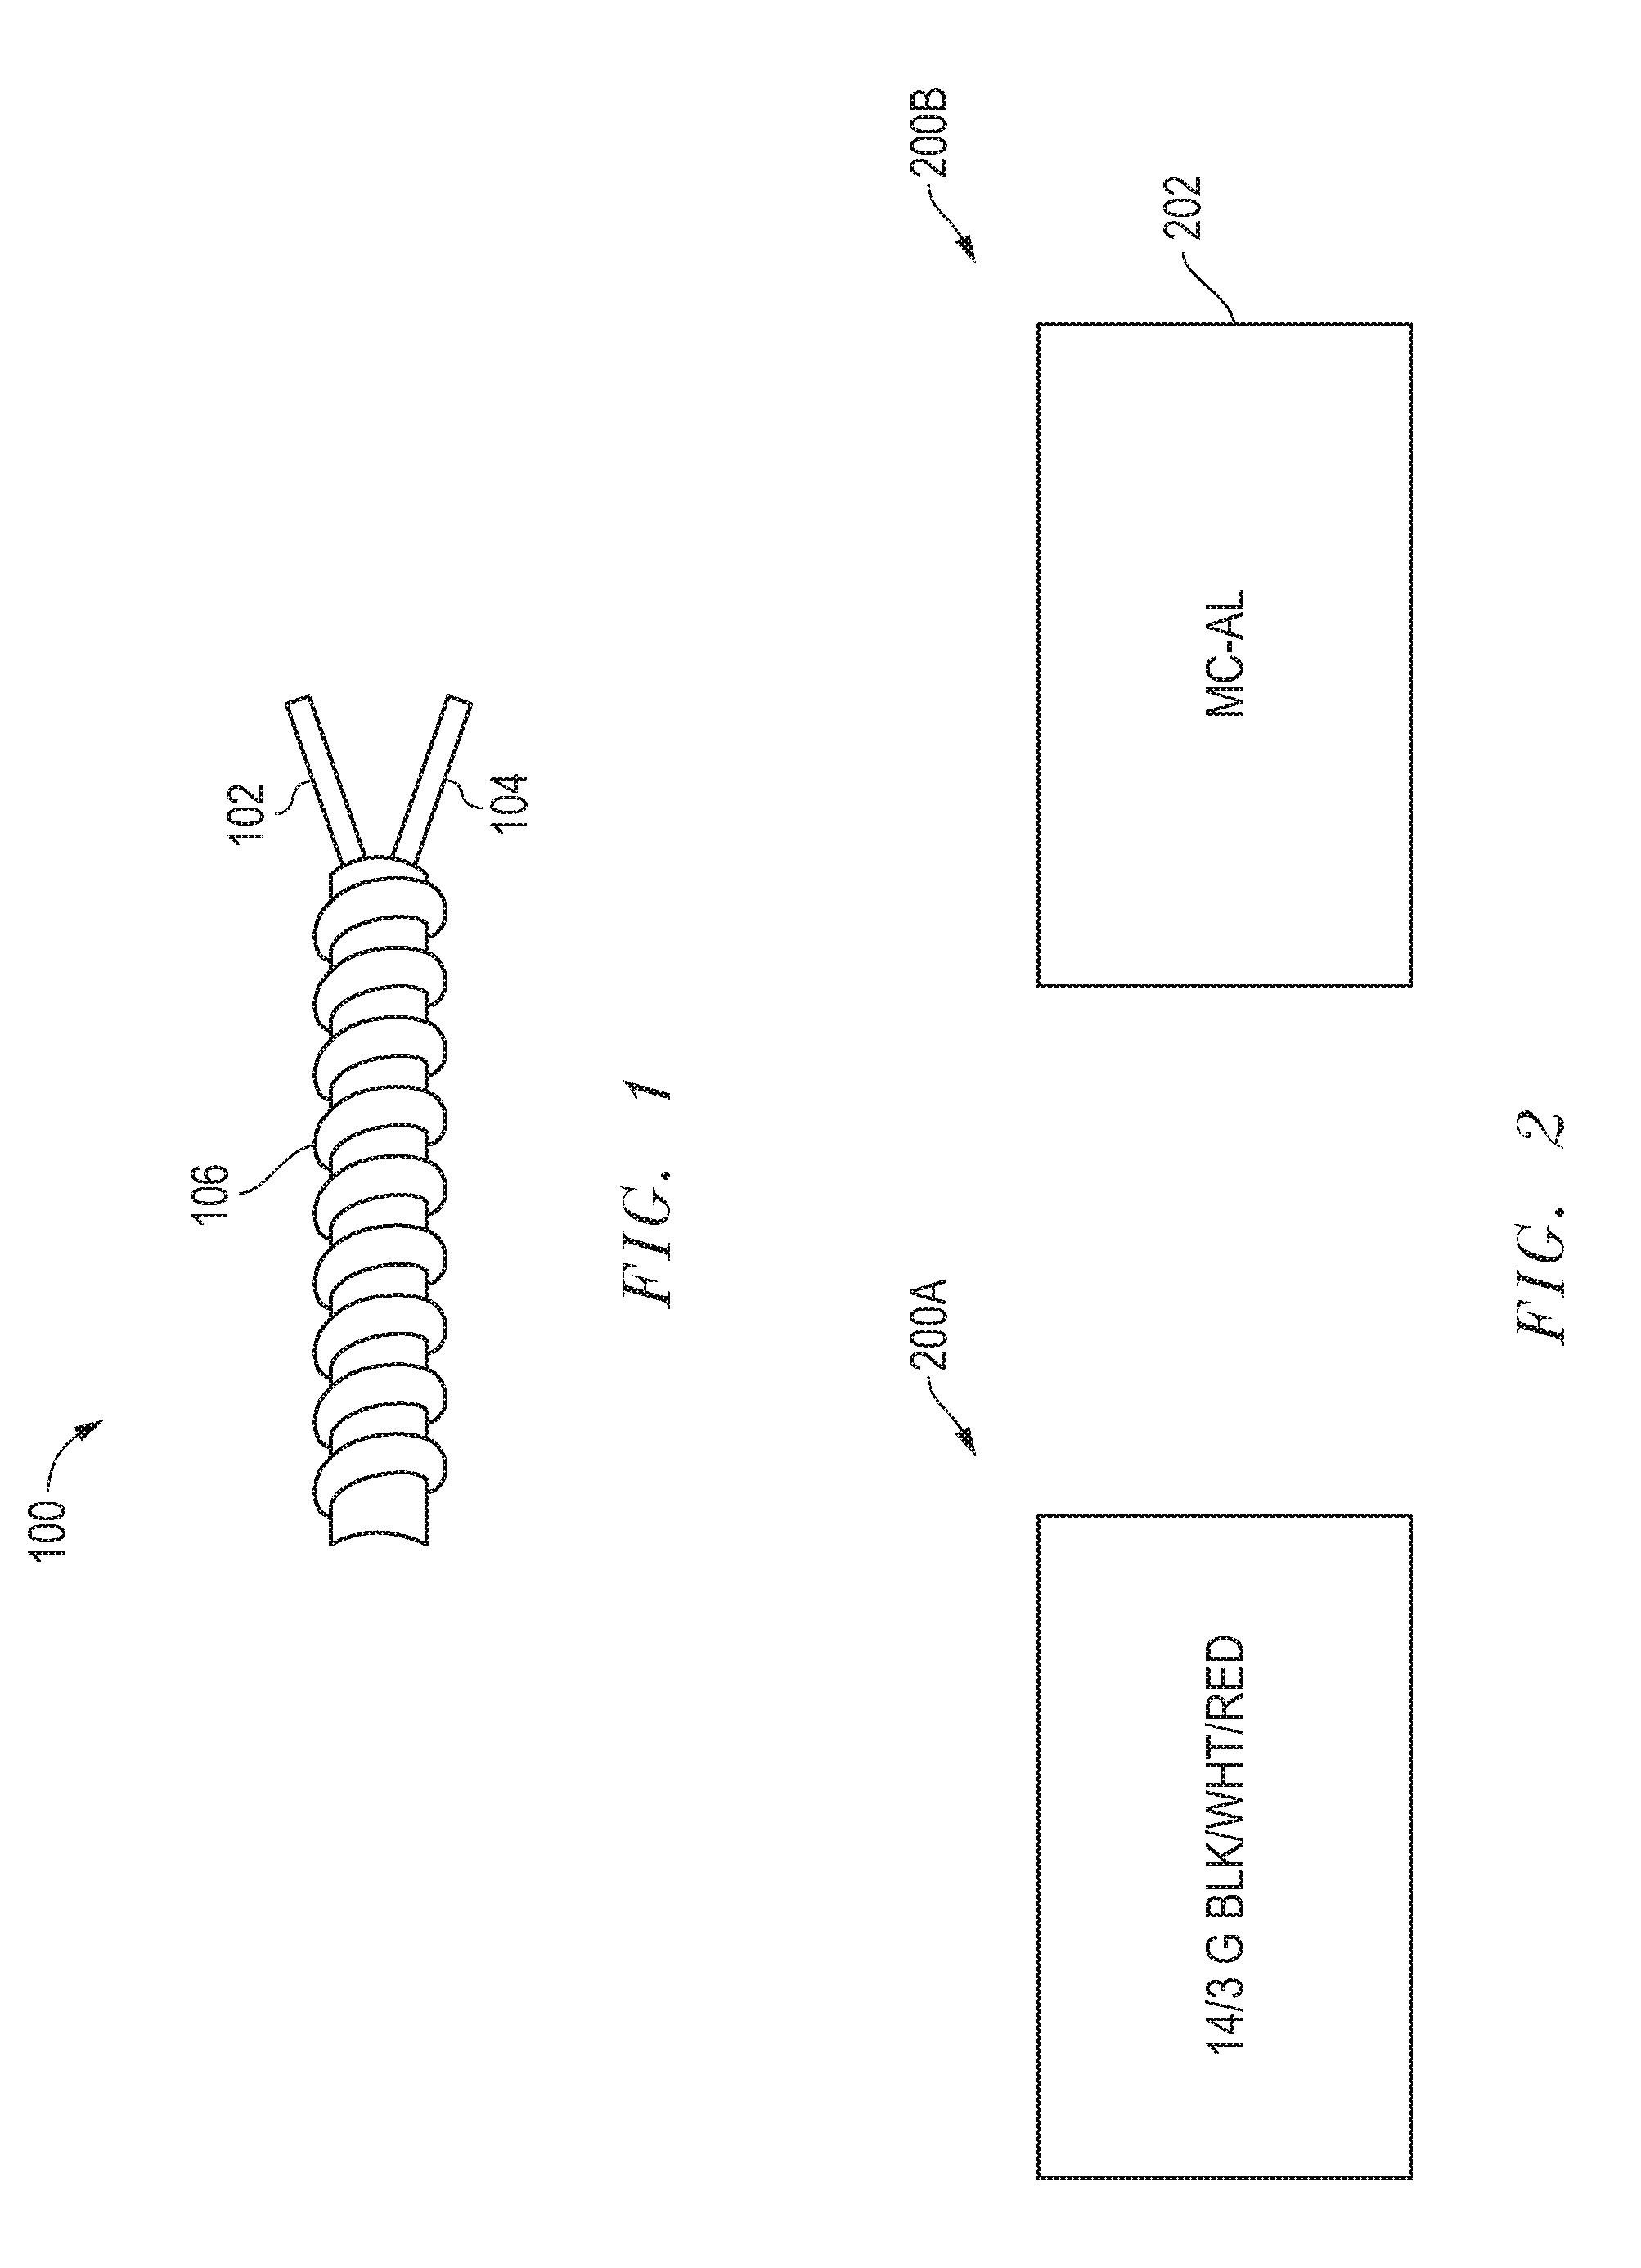 Method and apparatus for applying labels to cable or conduit